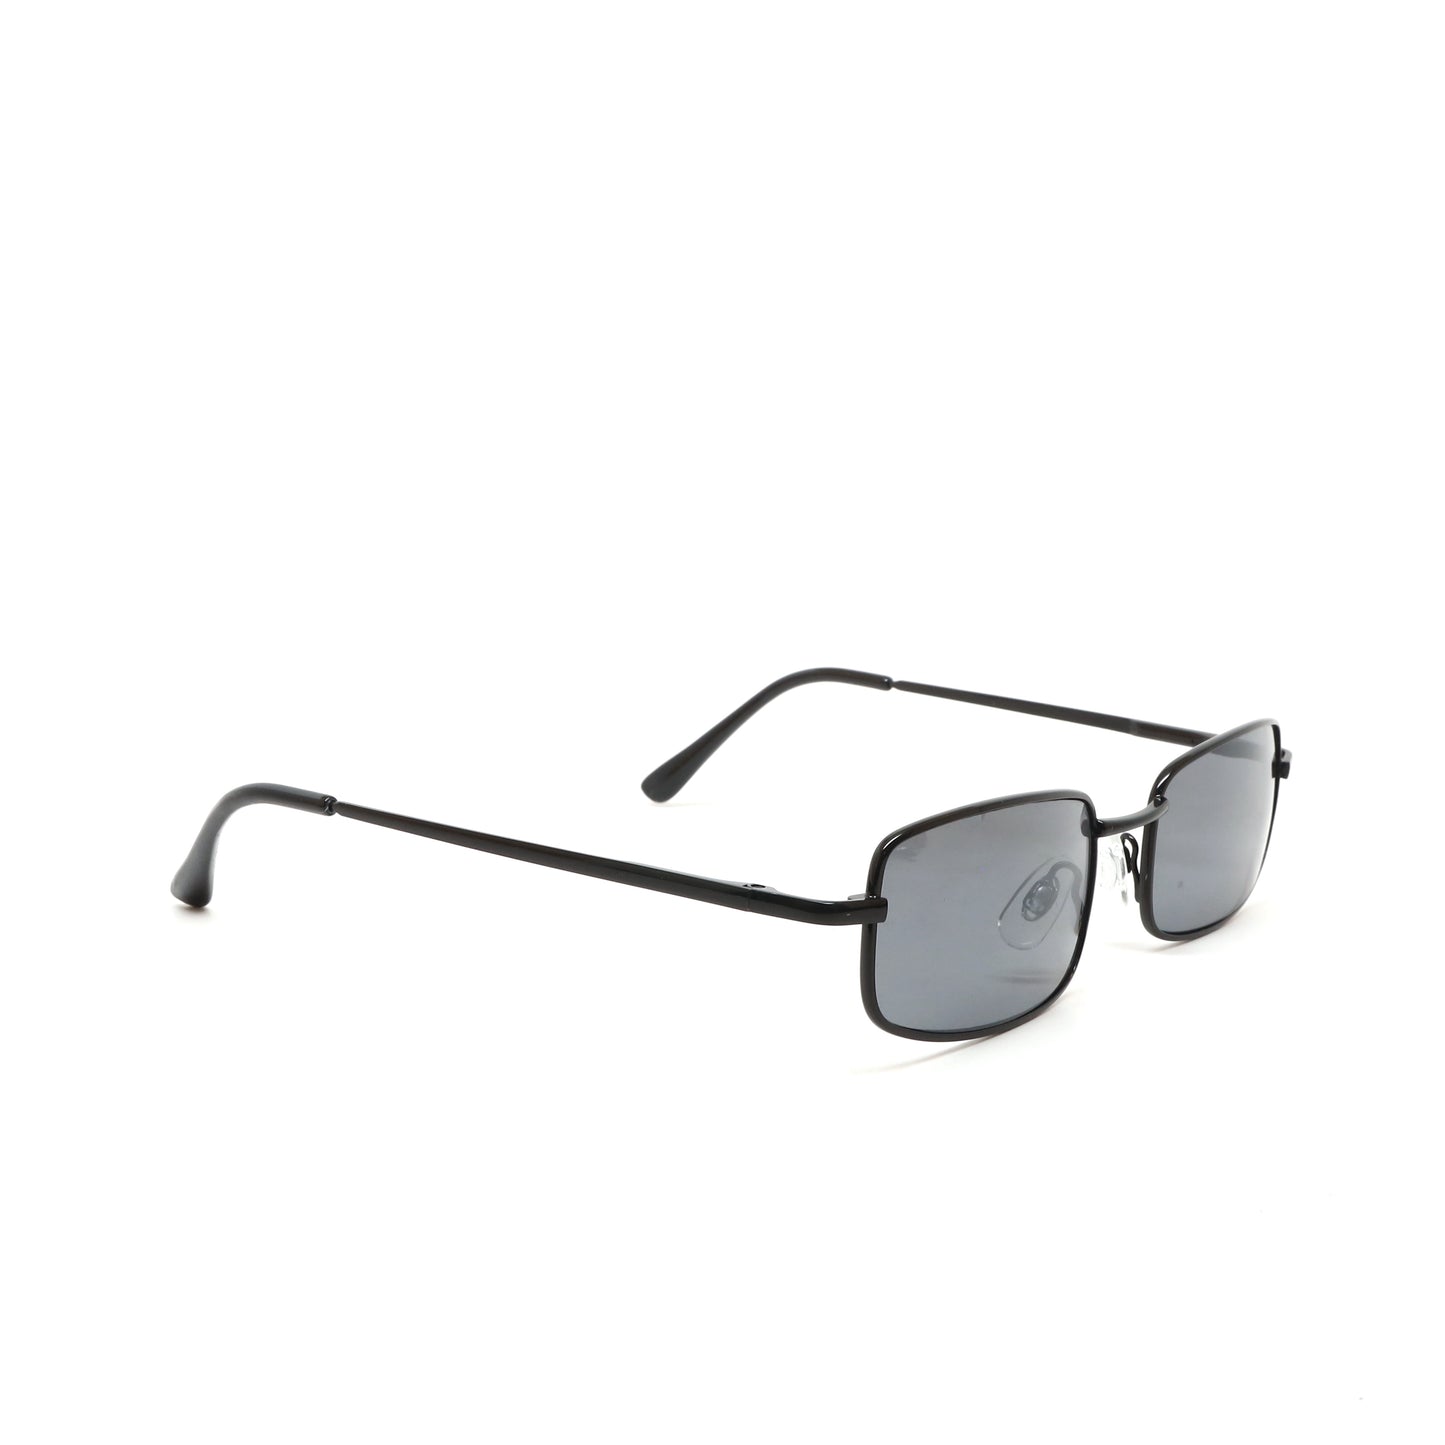 Deadstock Vintage Industrial Wire Rectangle Sunglasses - Grey